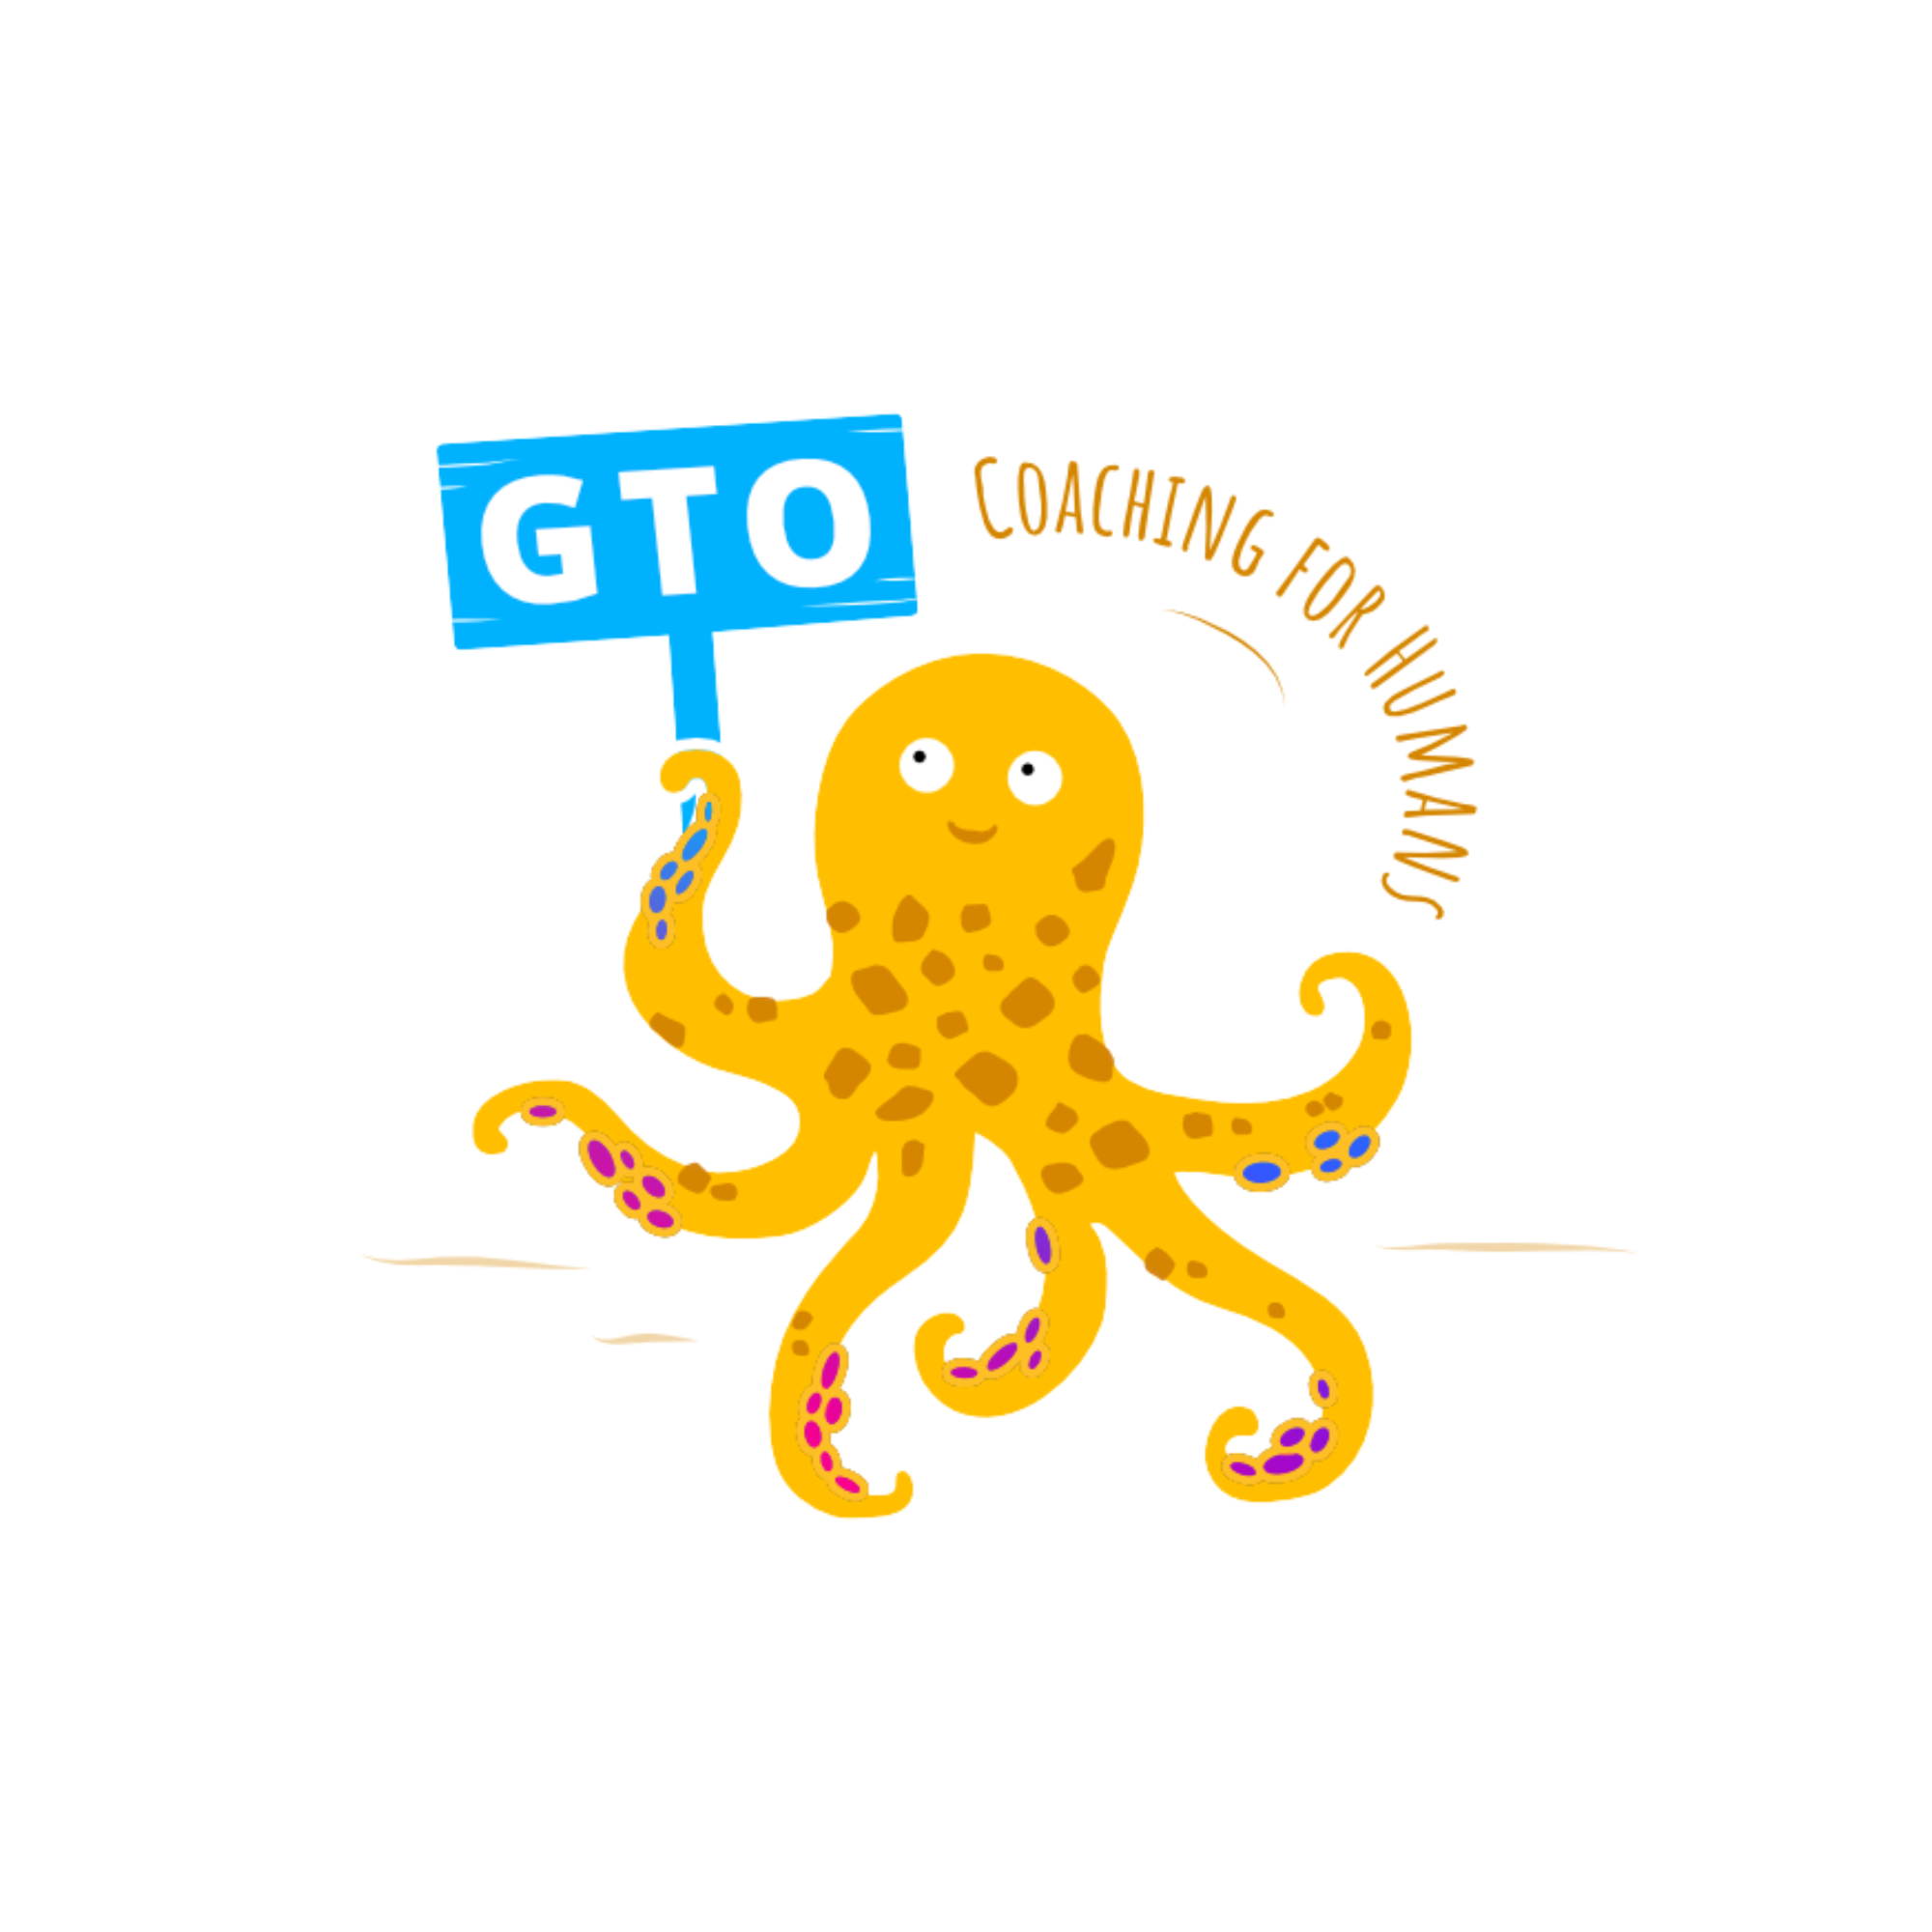 Friendly octopus holding a board sign! This is a logo design for a coaching company.